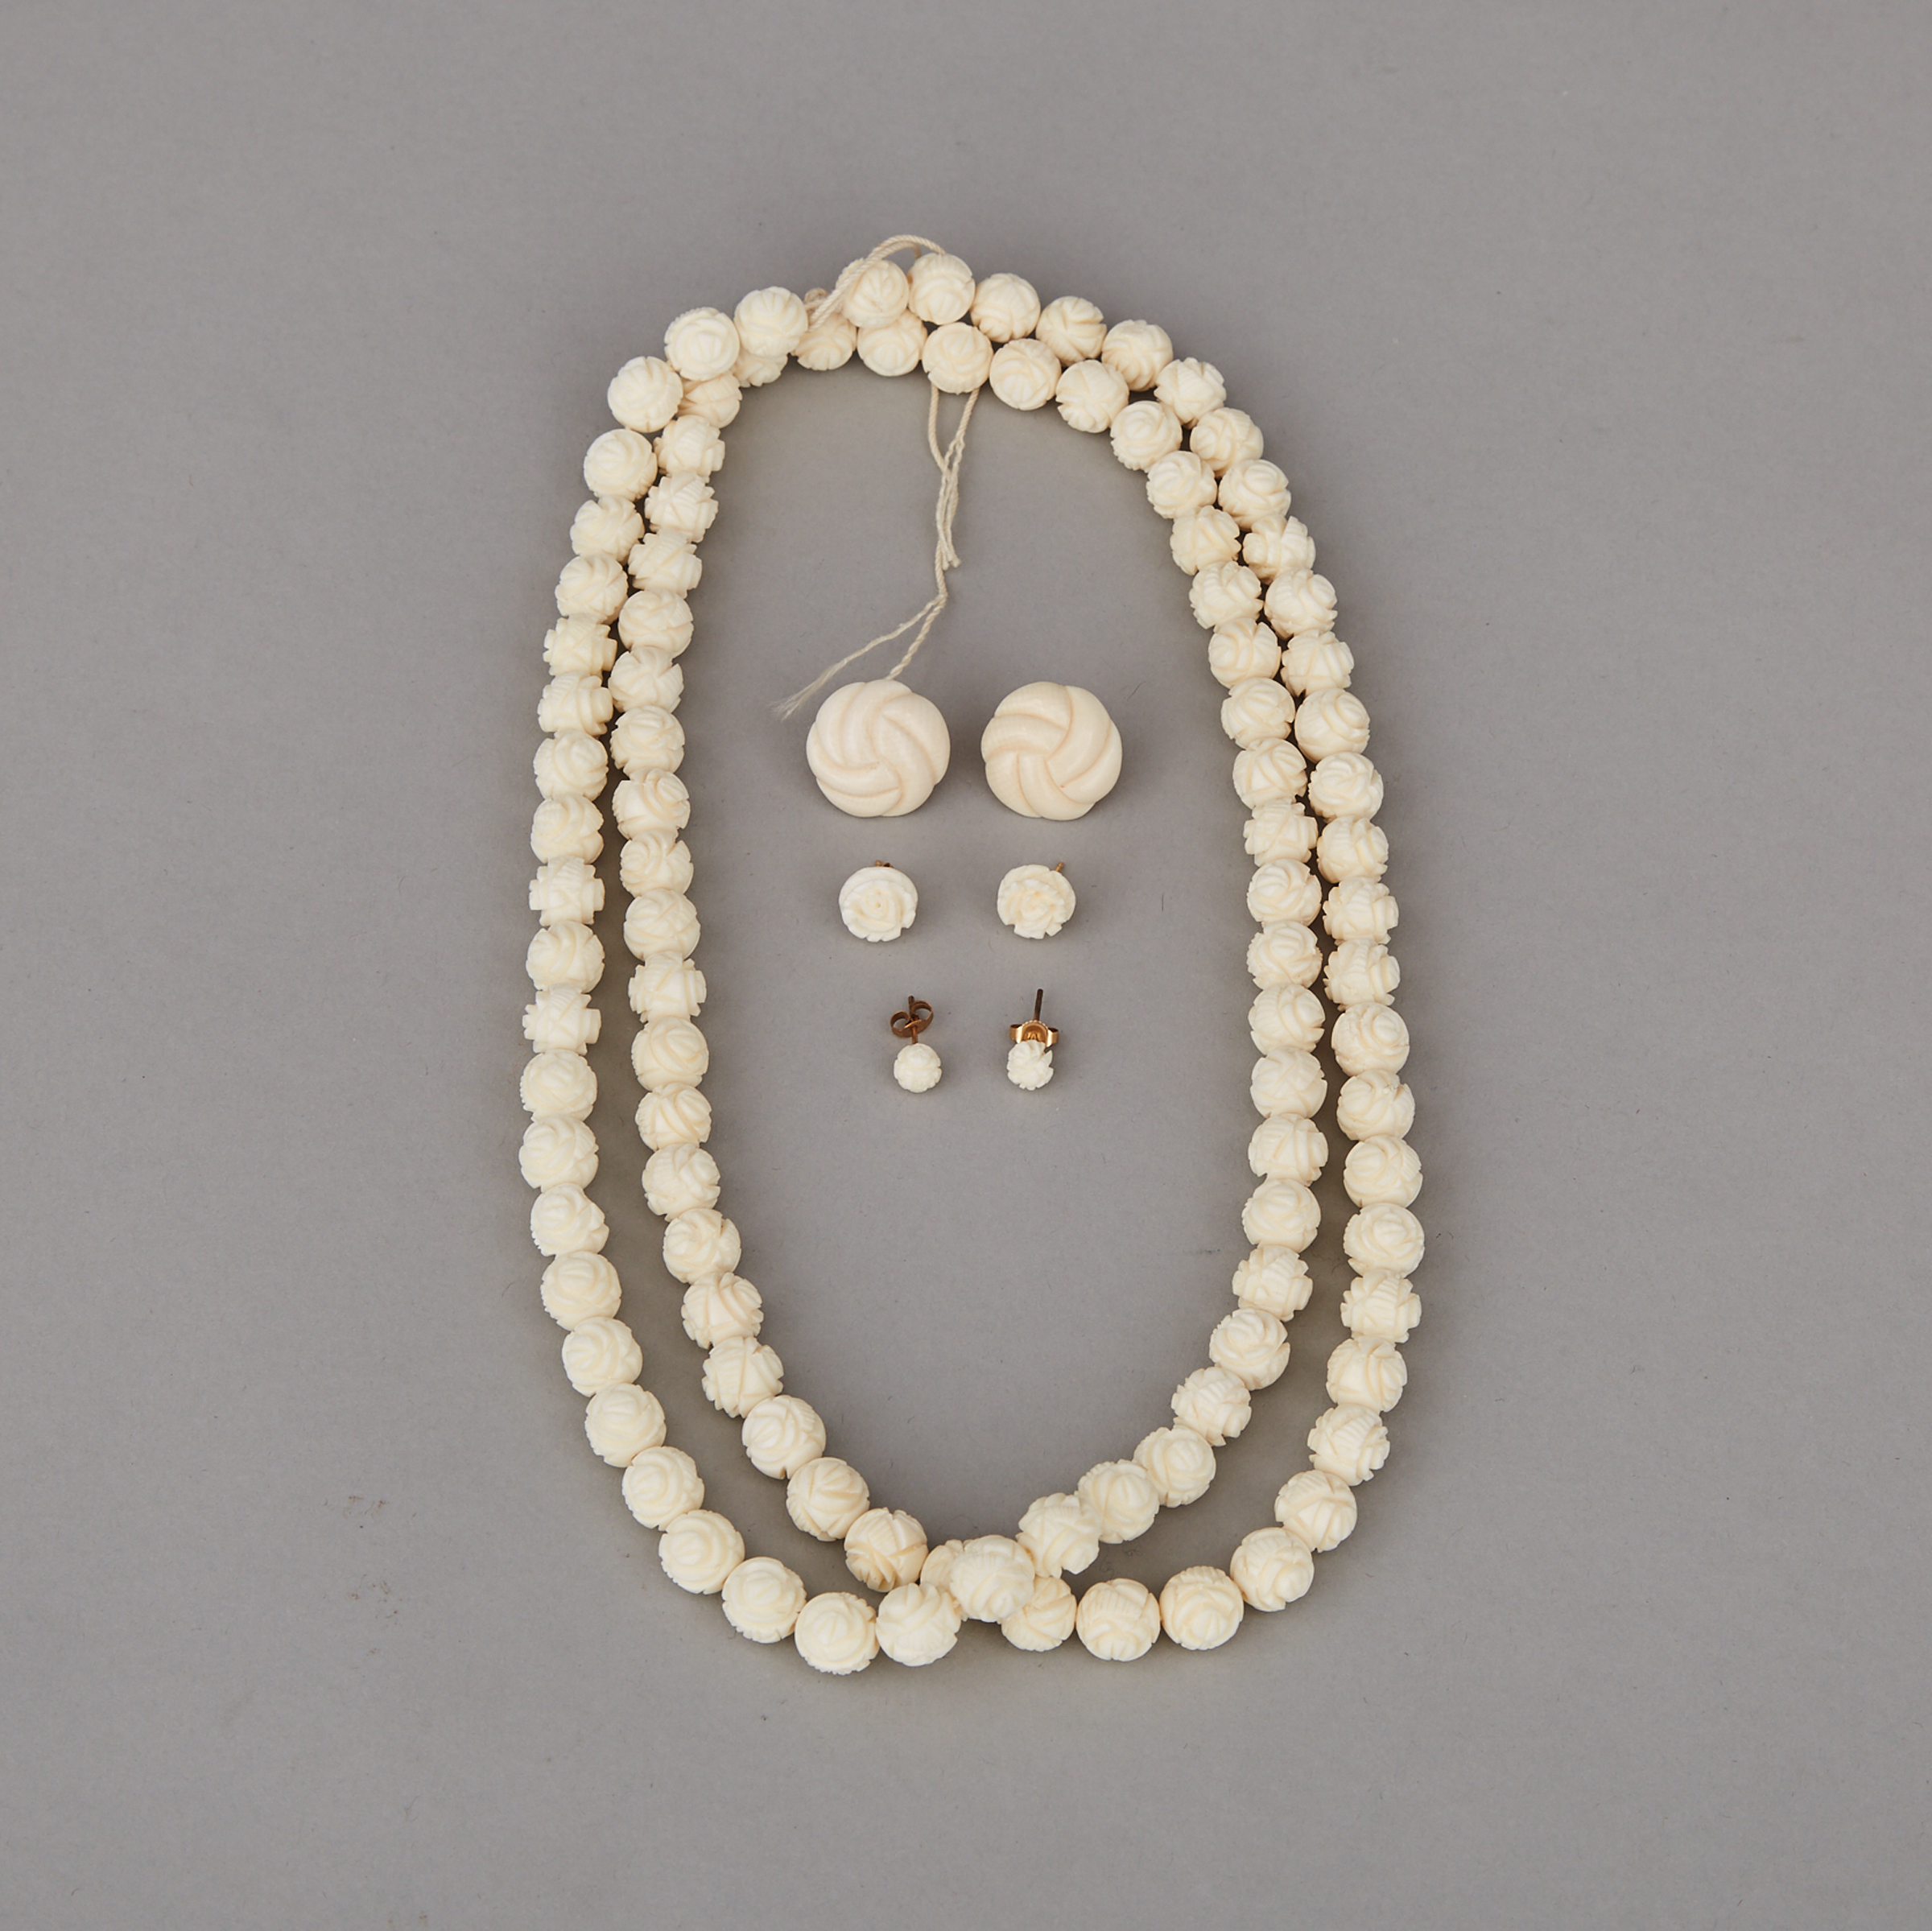 A Group of Ivory Carved Jewellery, Circa 1940